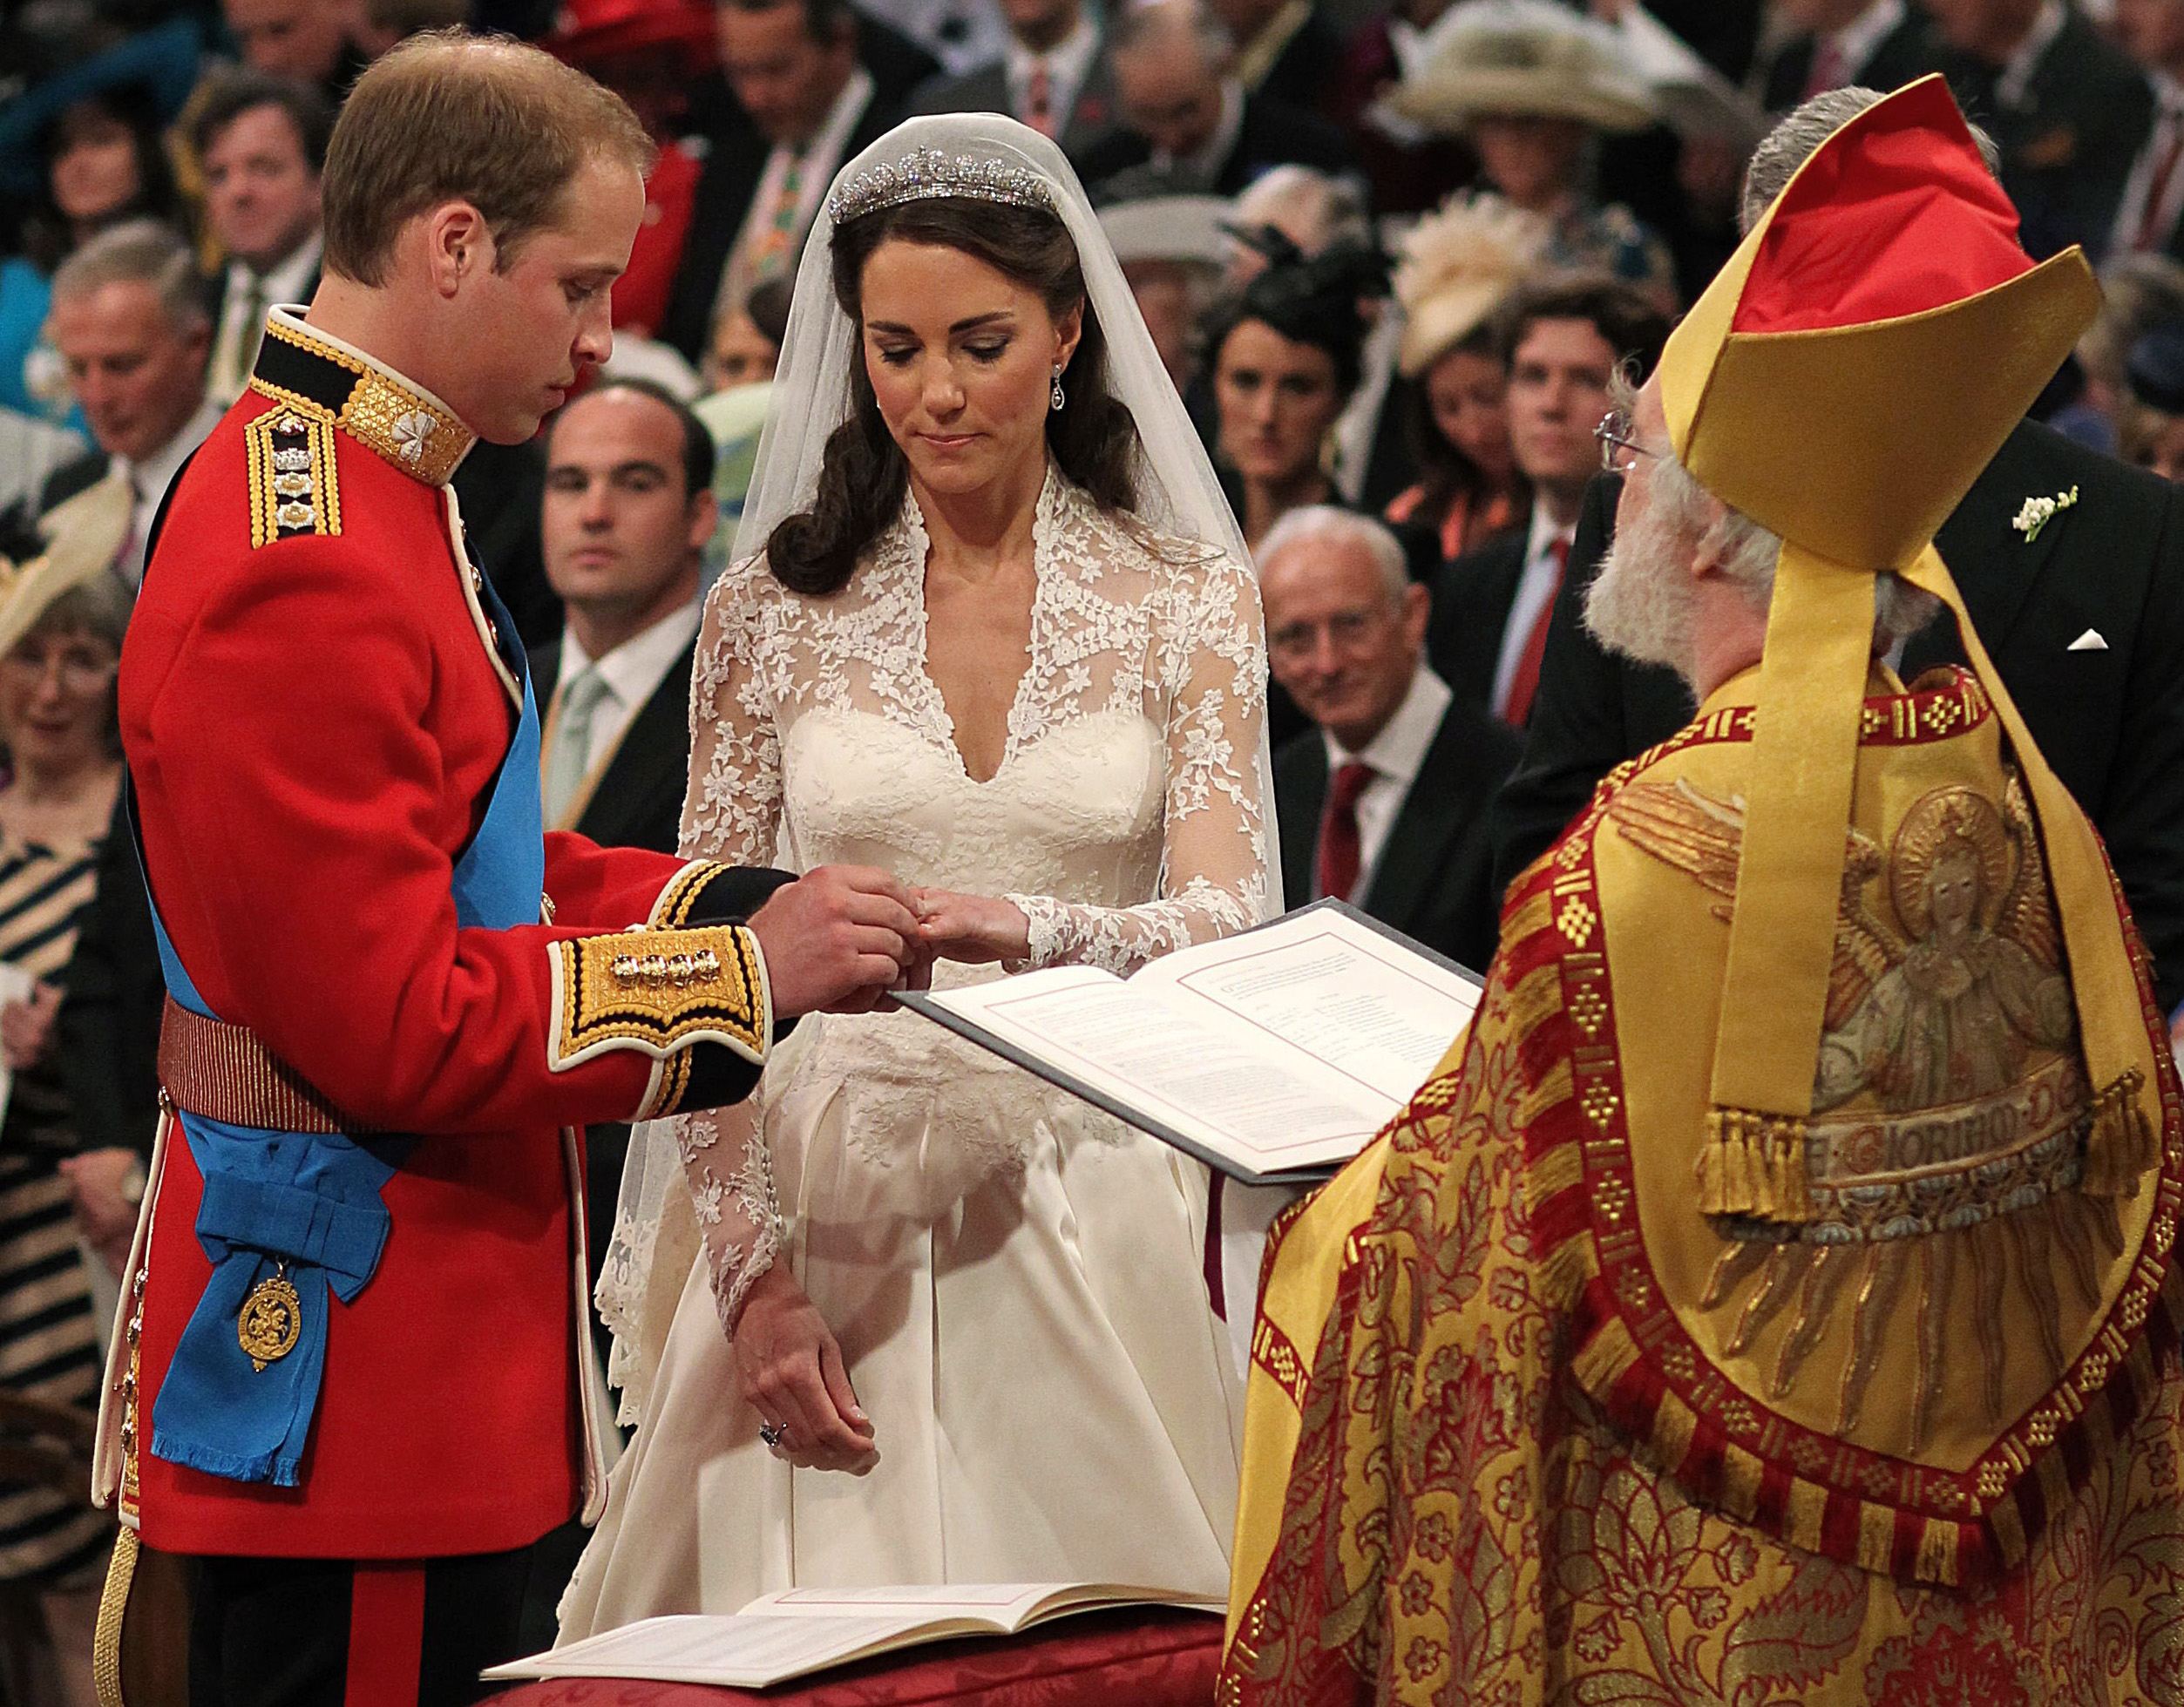 Britain's Prince William and Catherine Middleton, Duchess of Cambridge, exchange rings before the Archbishop of Canterbury, Dr. Rowan Williams, Westminster Abbey, Central London, April 29, 2011.